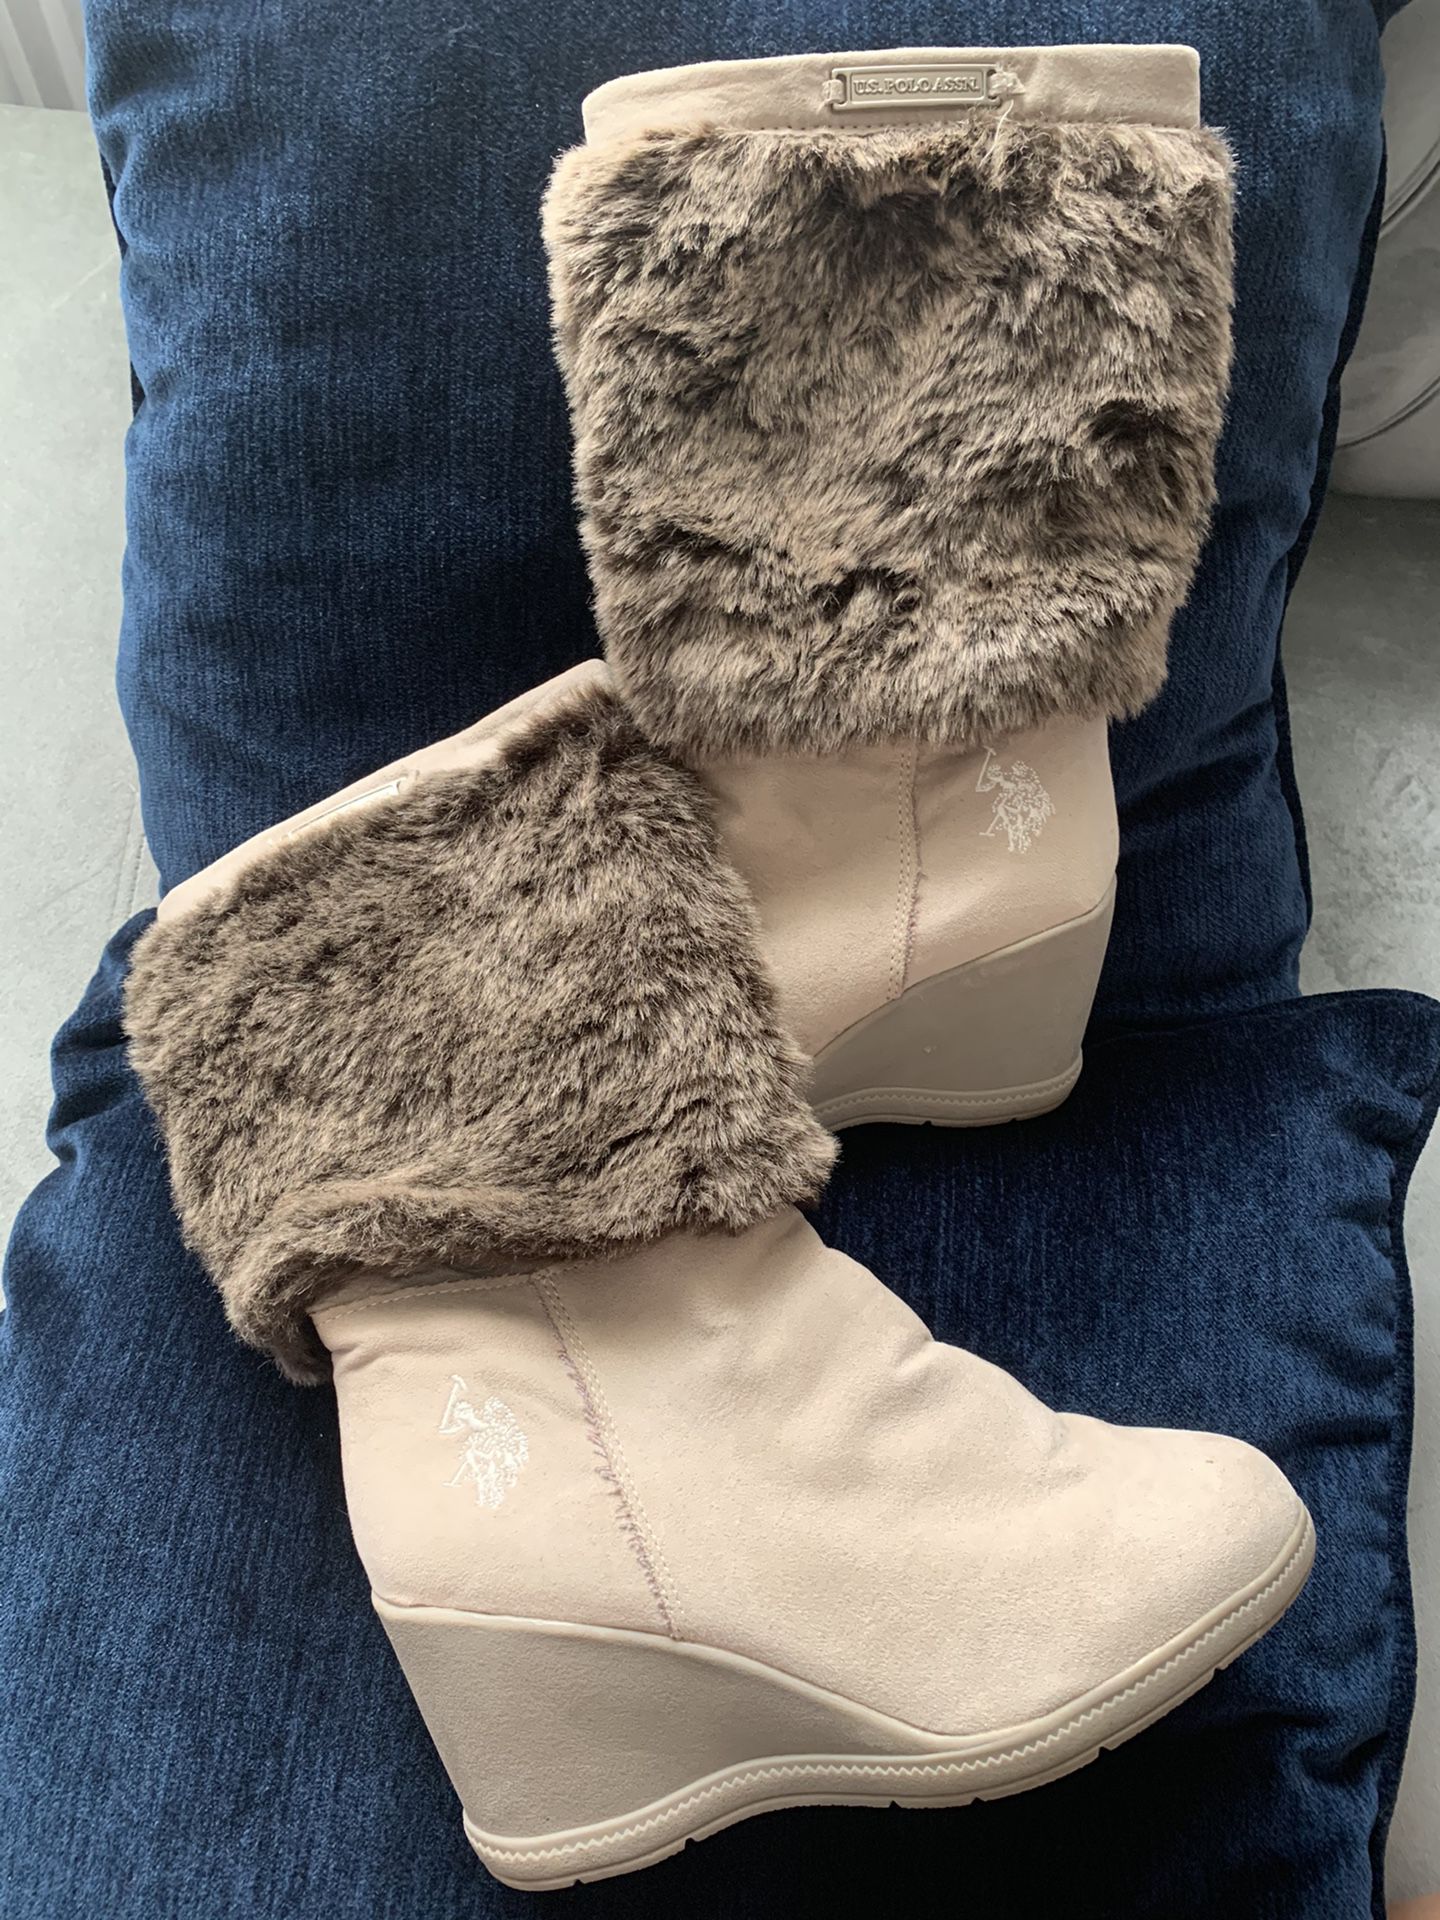 Boots, faux fur boots, u.s.polo boots, wedge heel boots, size 7